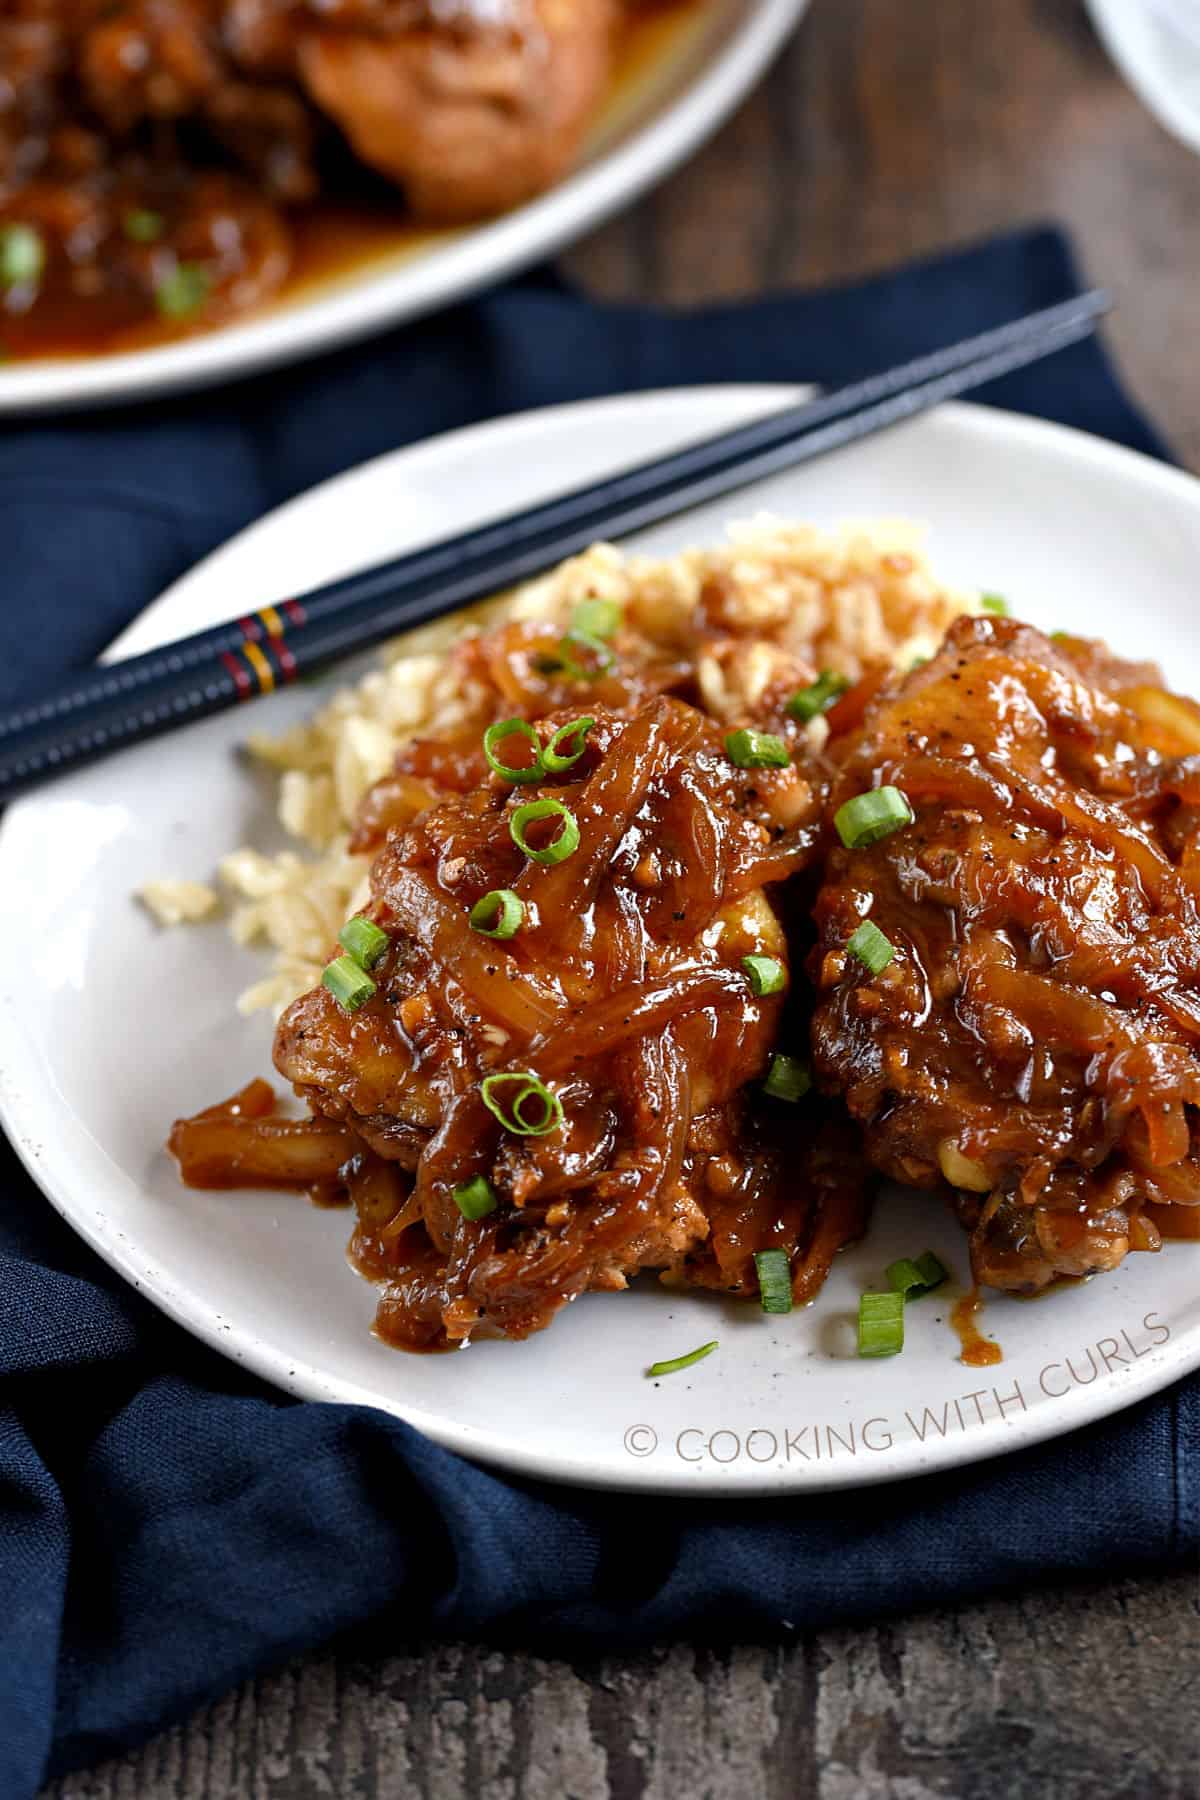 Two chicken thighs covered with a brown onion sauce and diced green onions on a bed of rice with chopsticks in the upper left corner of the plate.